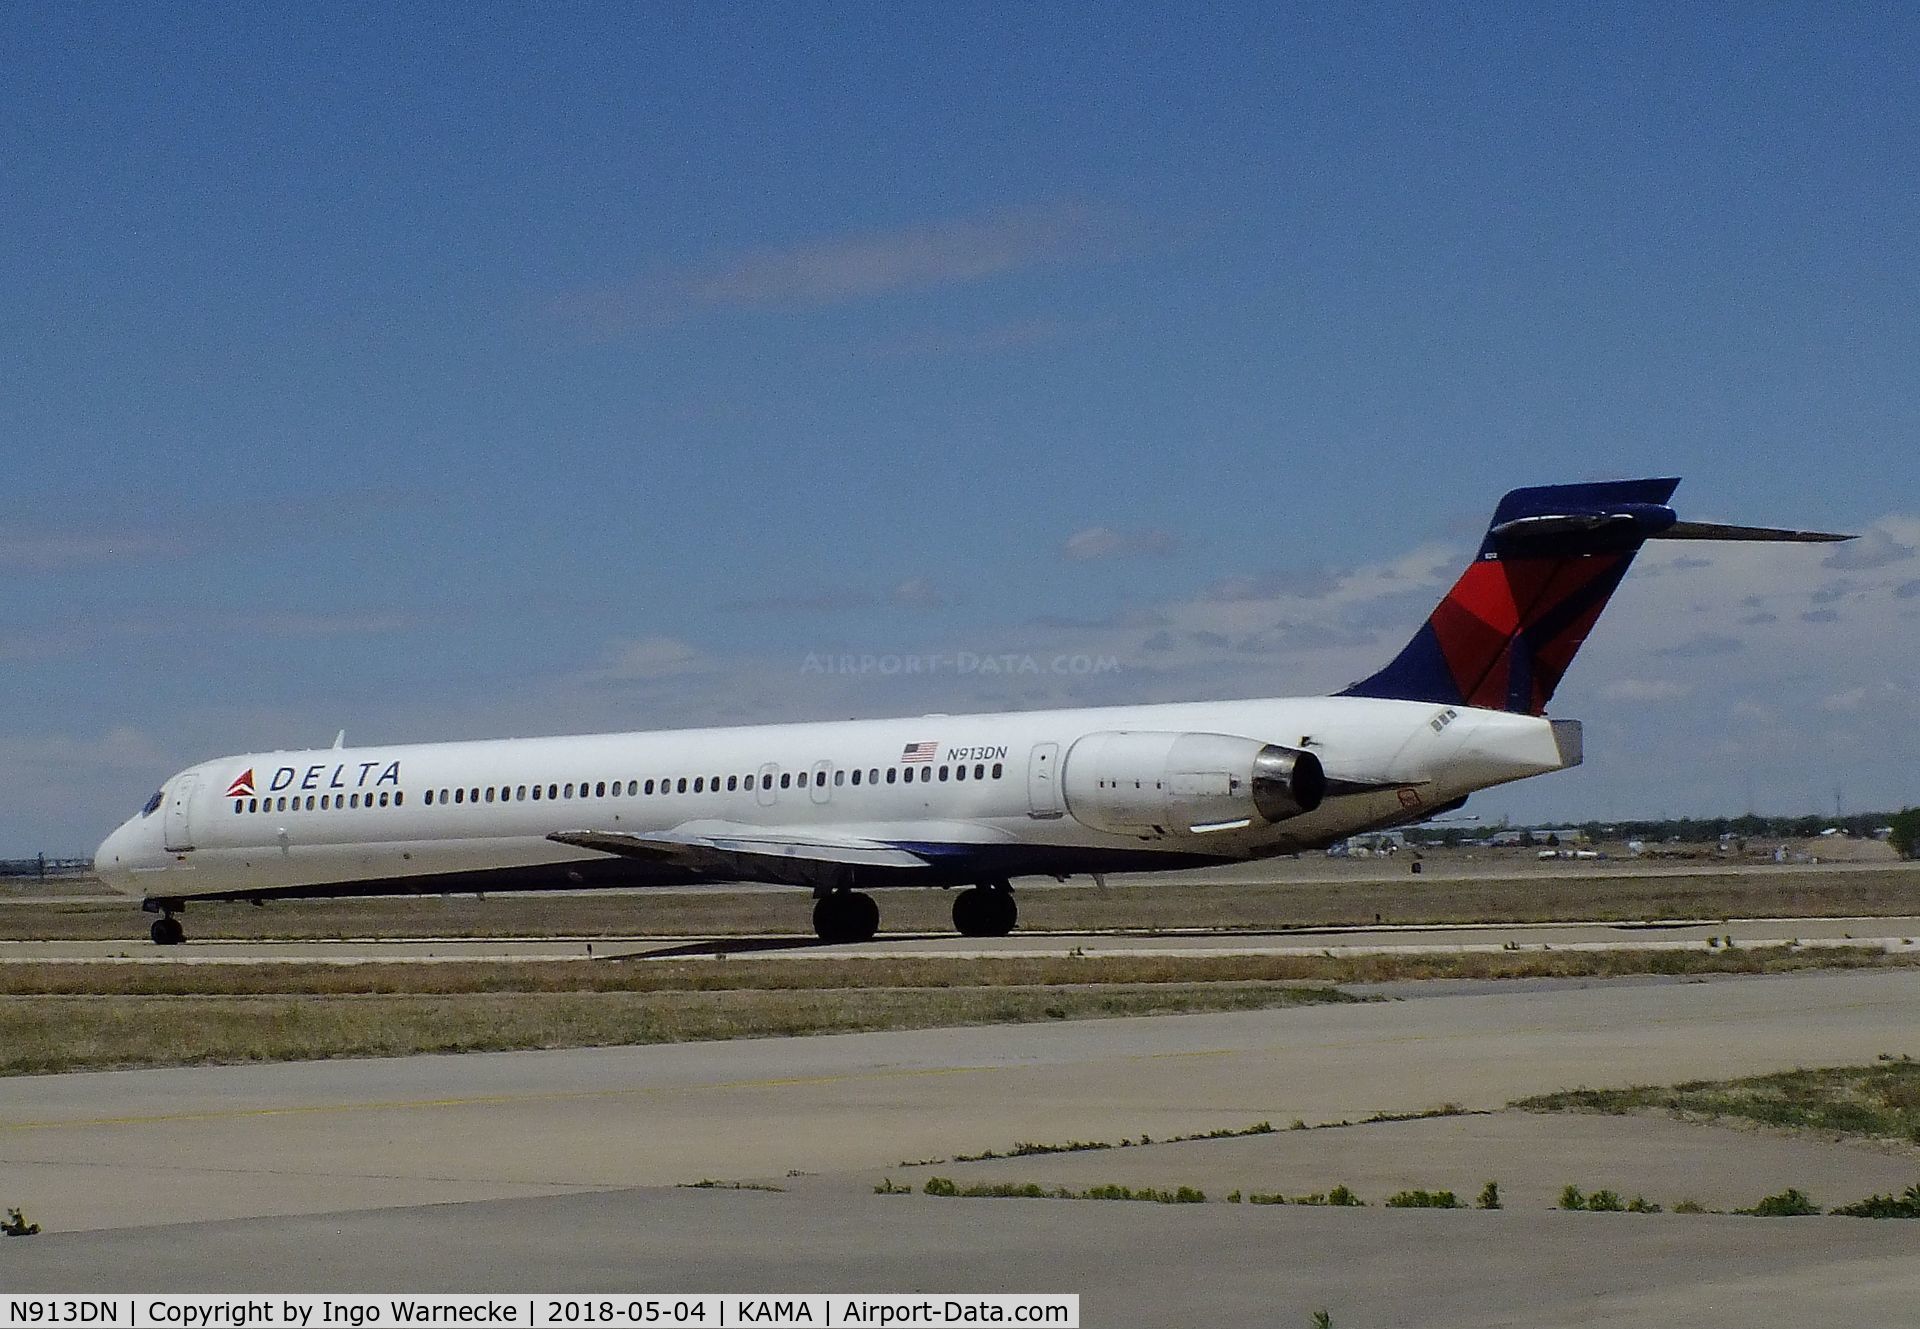 N913DN, 1996 McDonnell Douglas MD-90-30 C/N 53393, McDonnell Douglas MD-90-30 of Delta Airlines at Rick Husband Amarillo International Airport, Amarillo TX